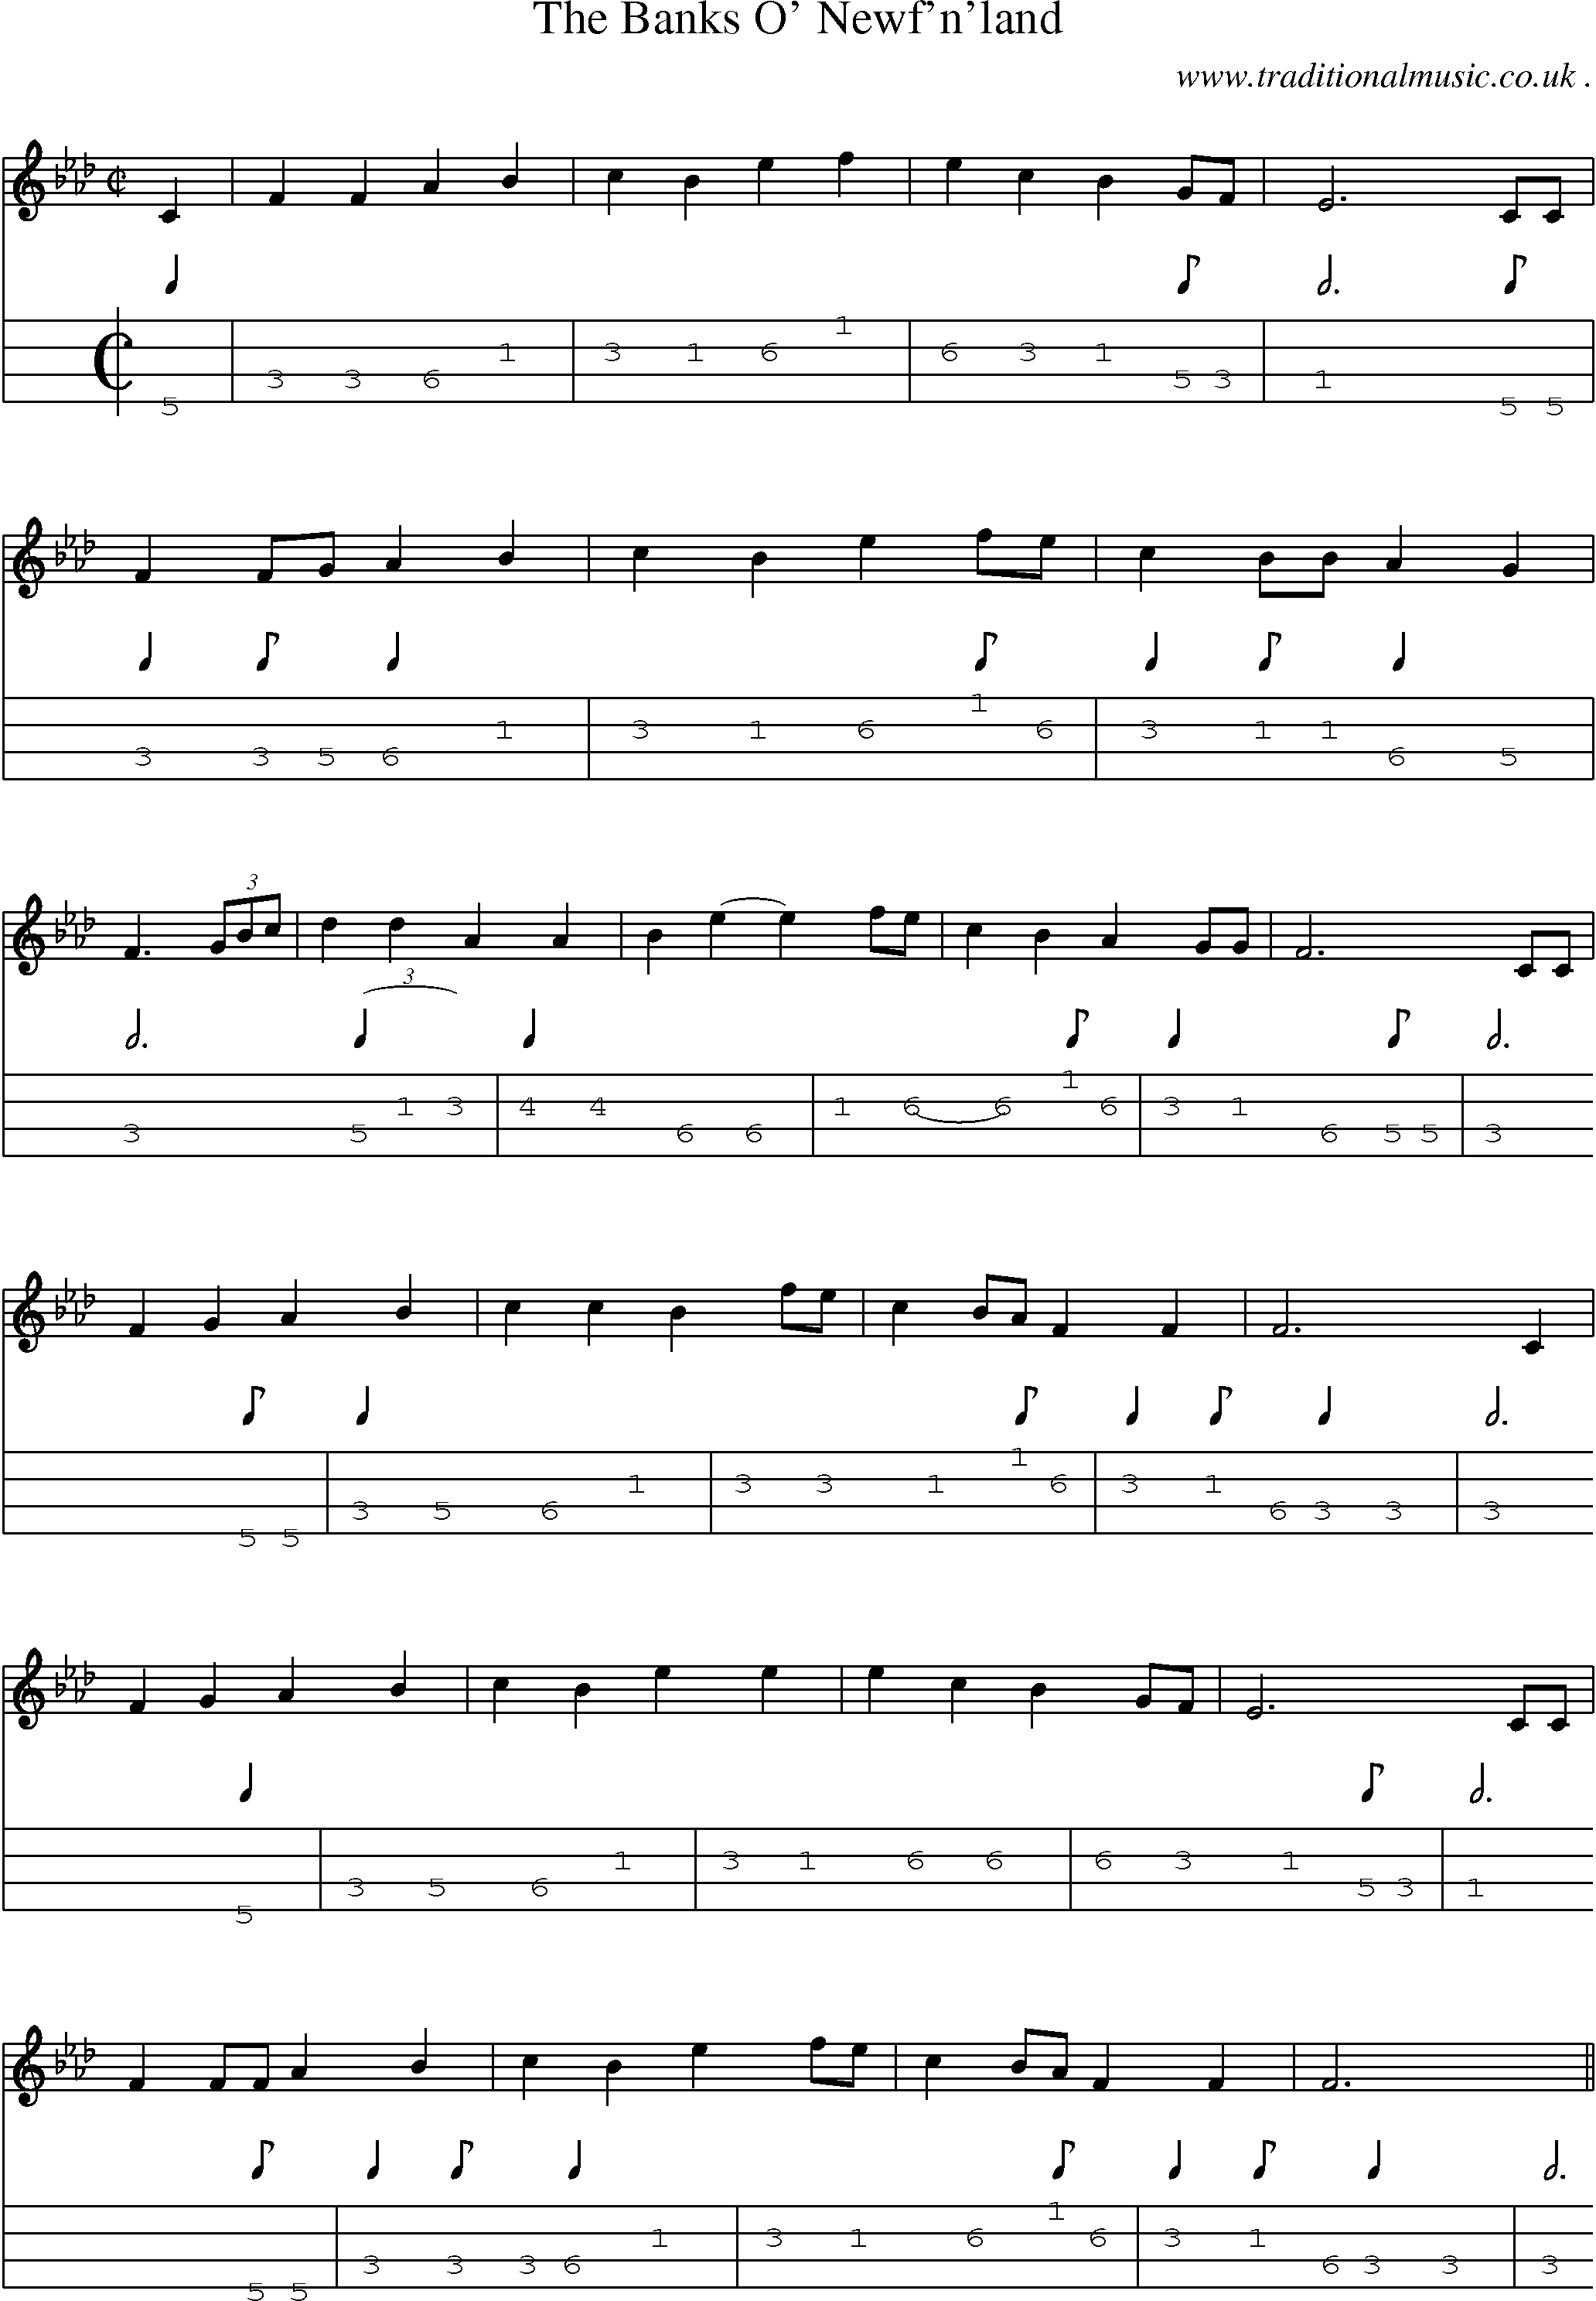 Sheet-Music and Mandolin Tabs for The Banks O Newfnland